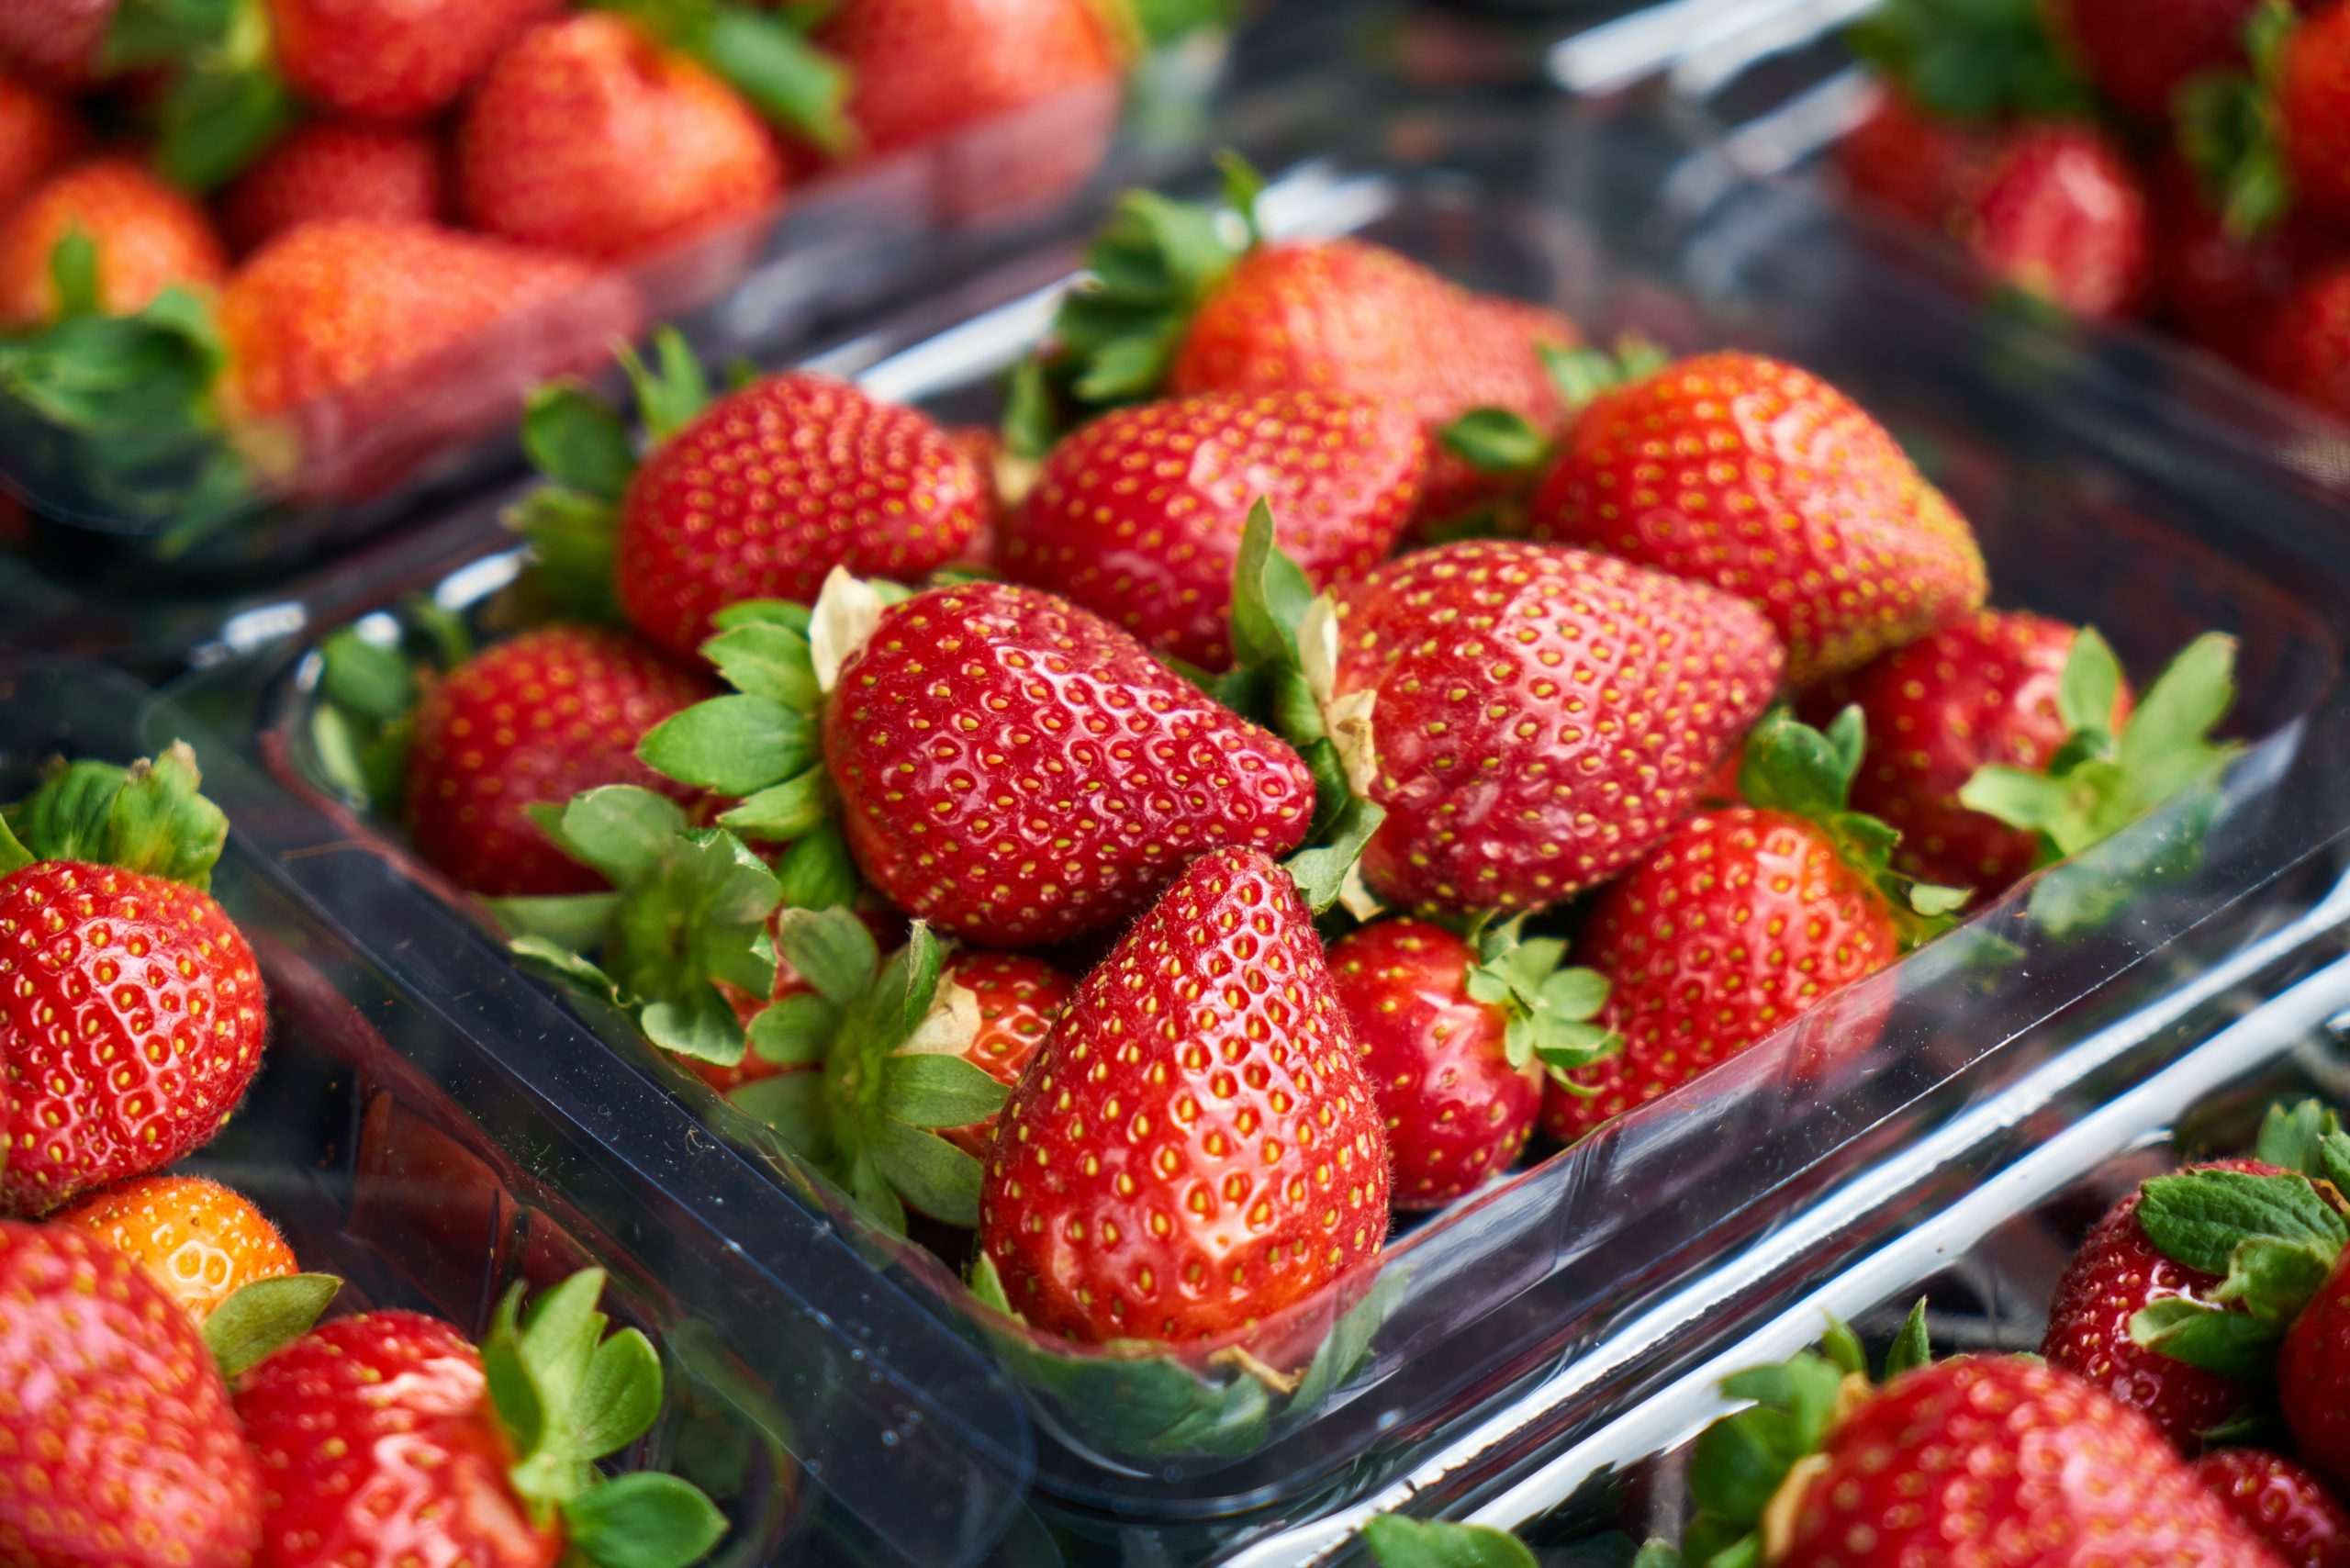 Can You Plant Seeds From Store Bought Strawberries?